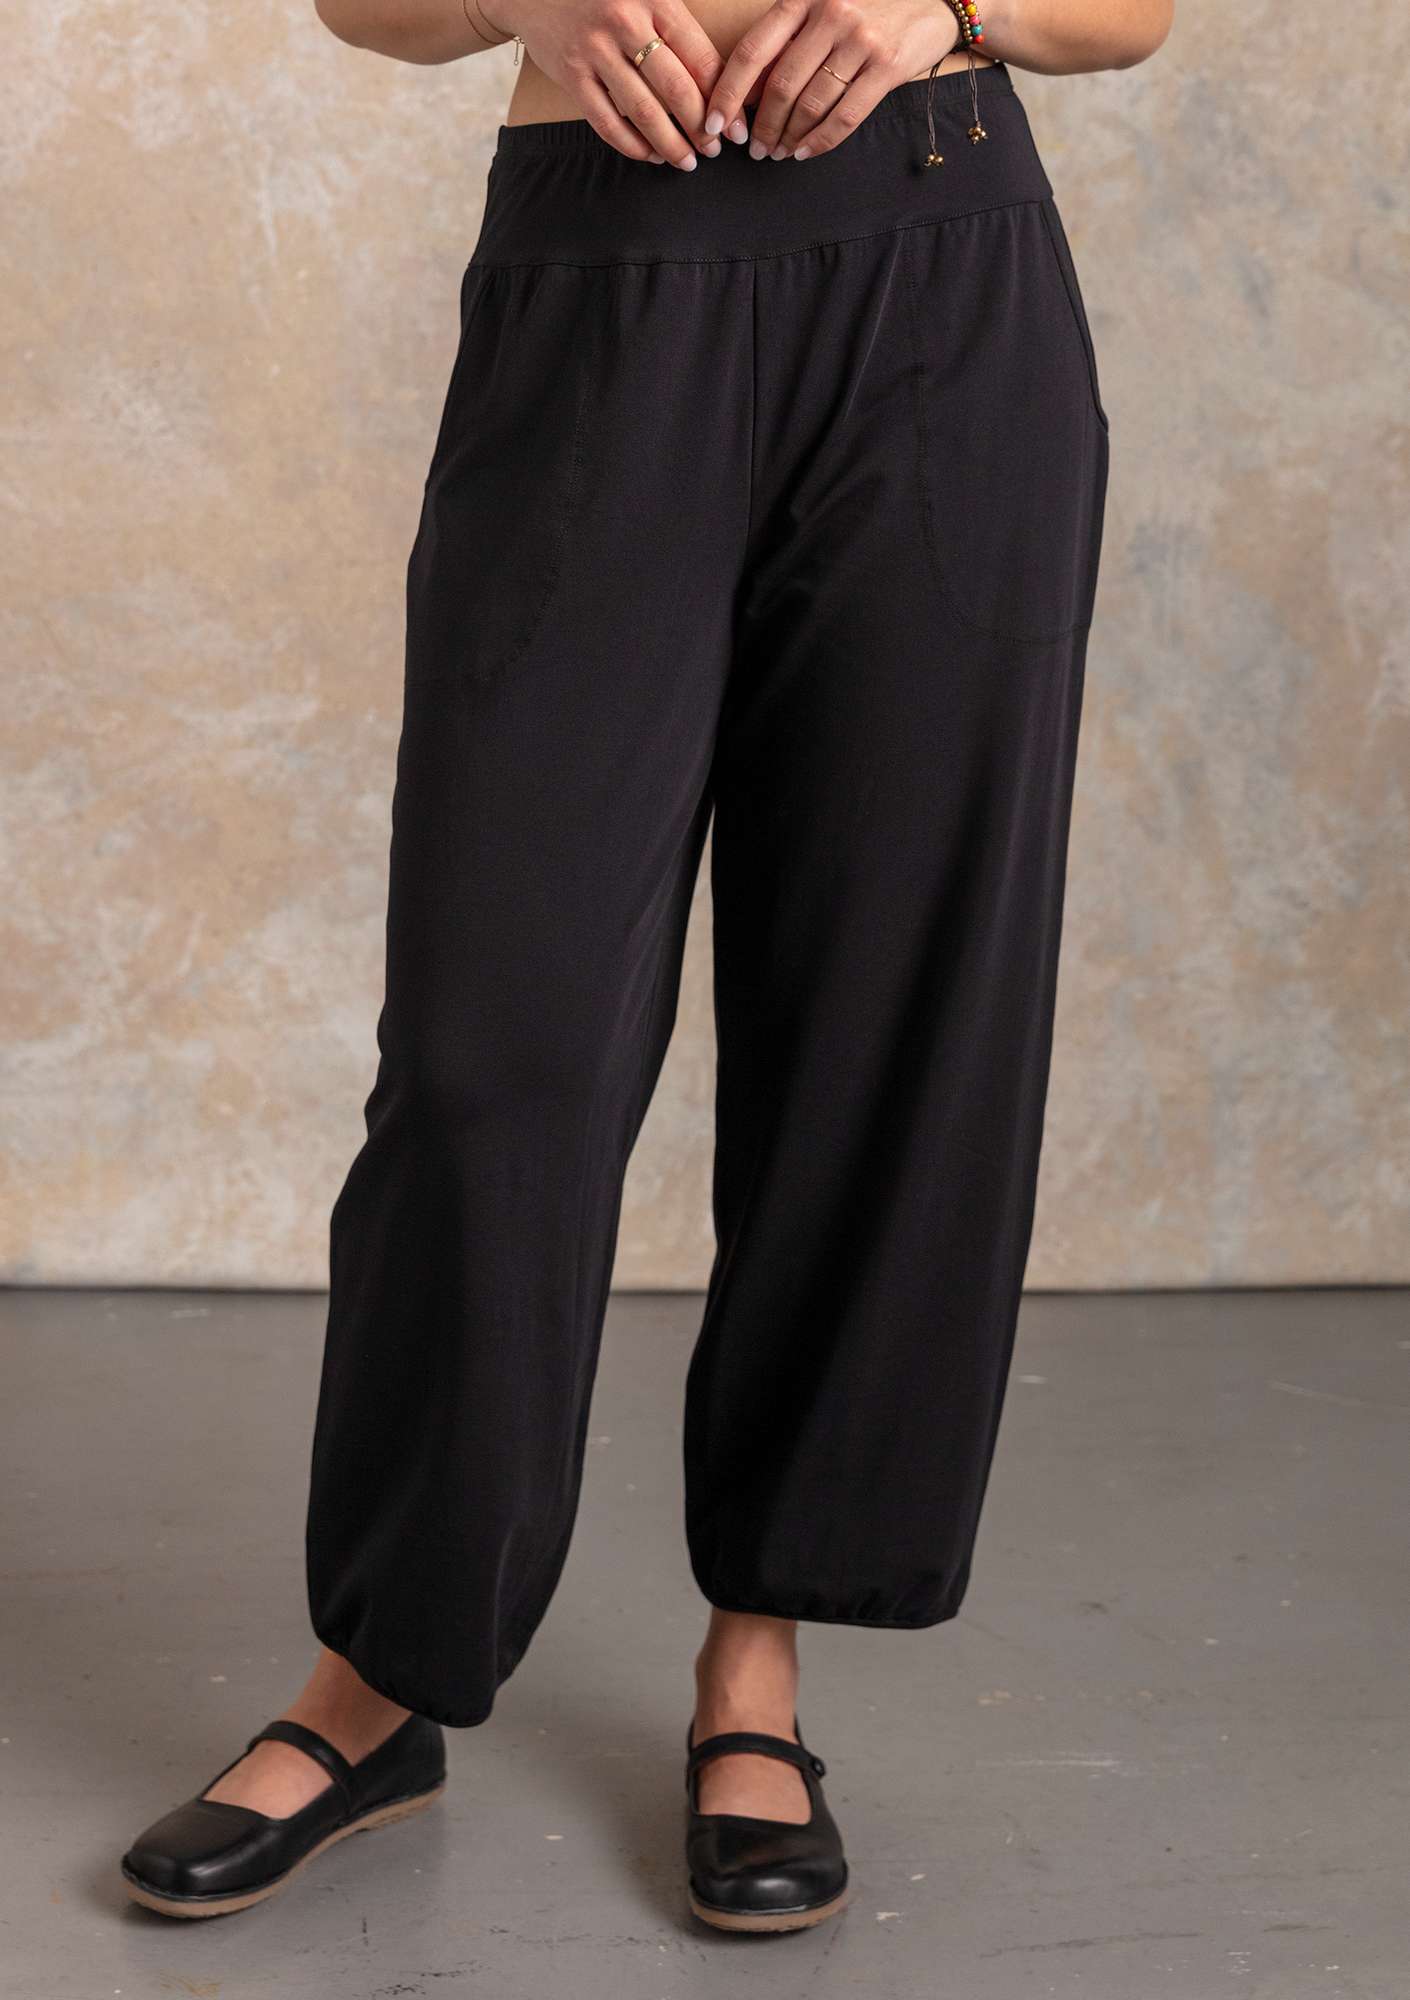 Solid-colored jersey pants black